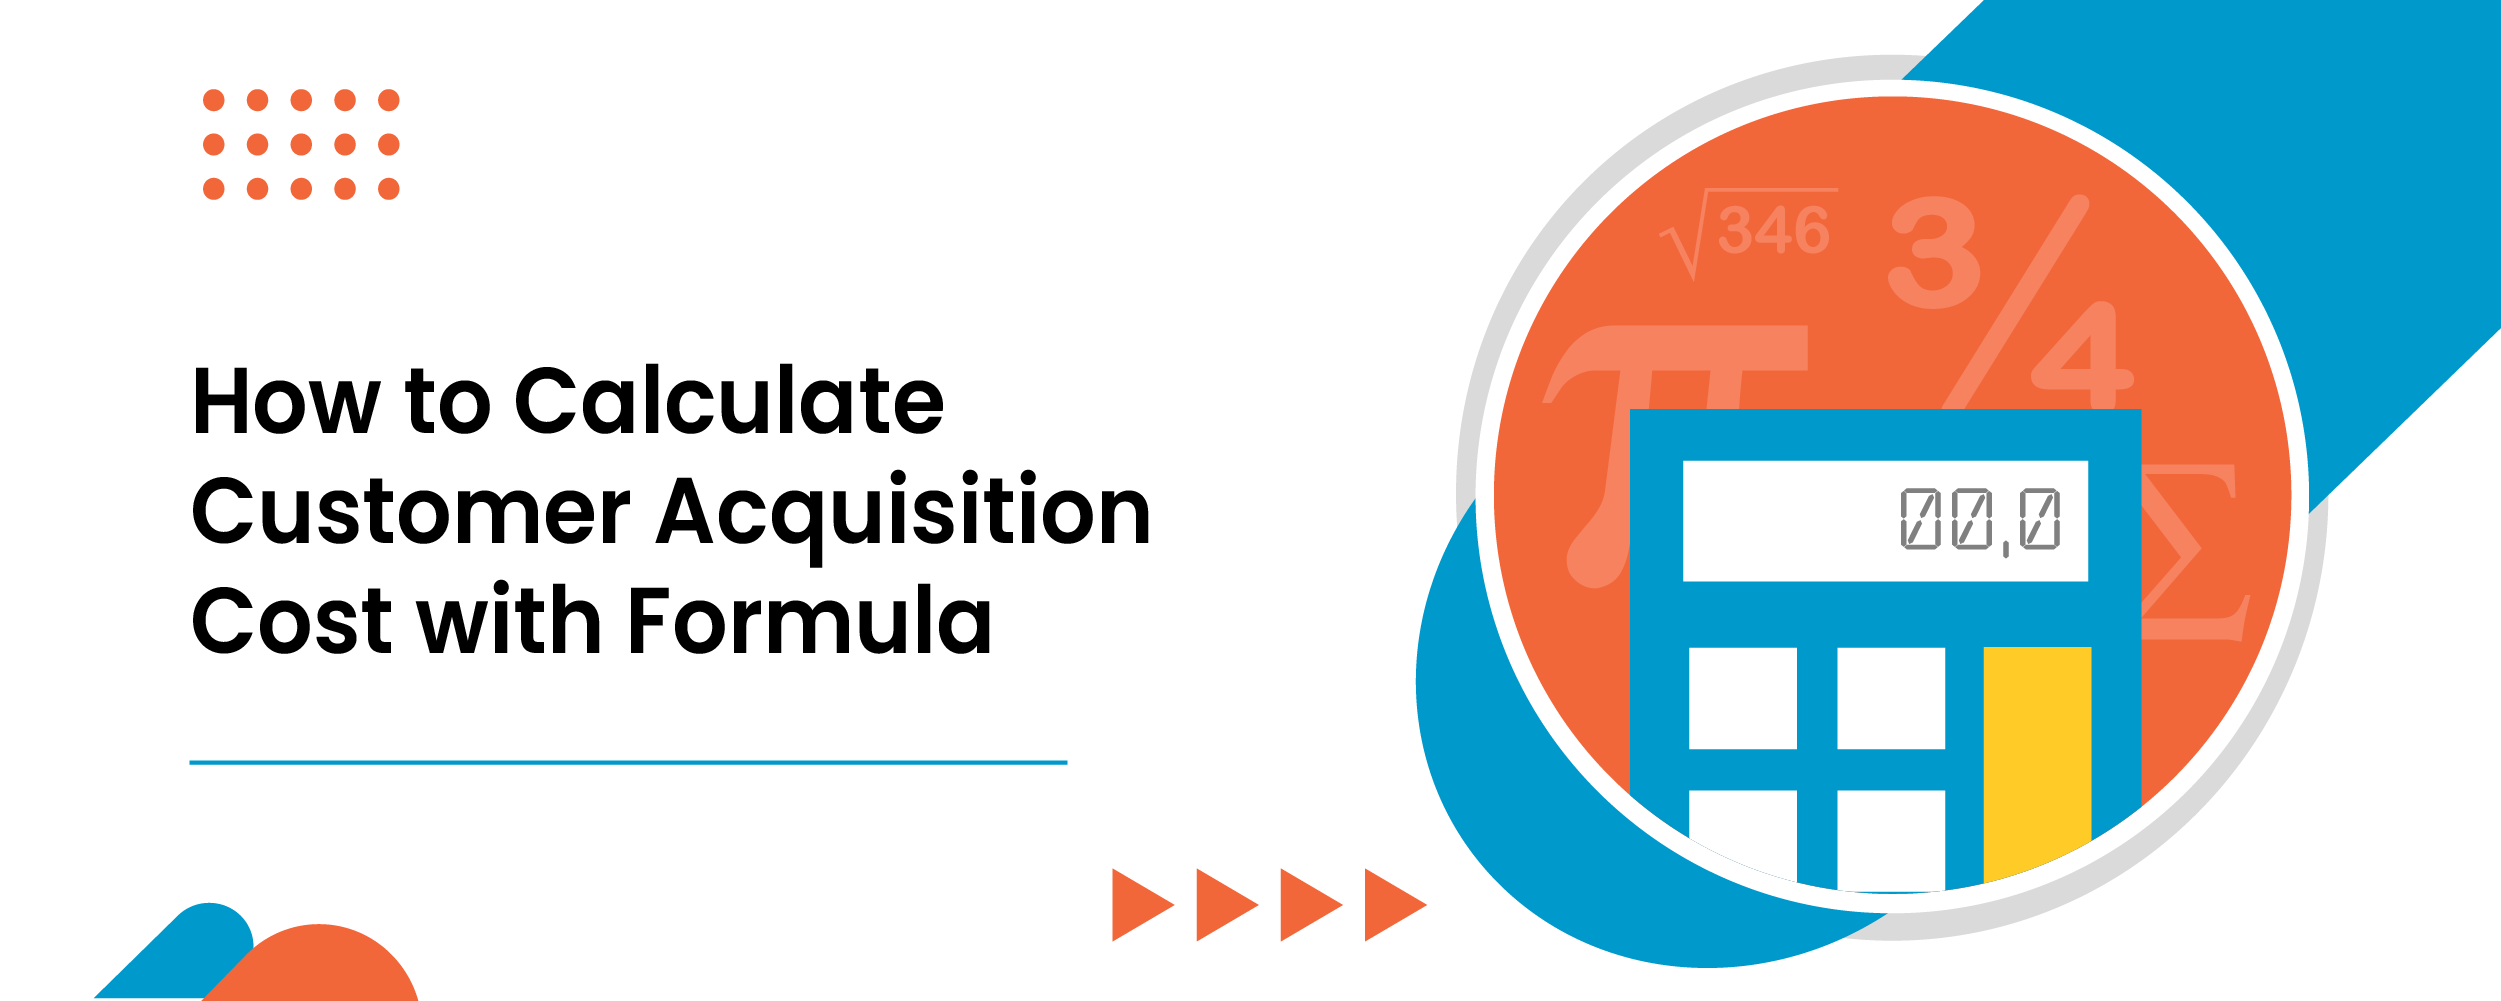 How to Calculate Customer Acquisition Cost with Formula